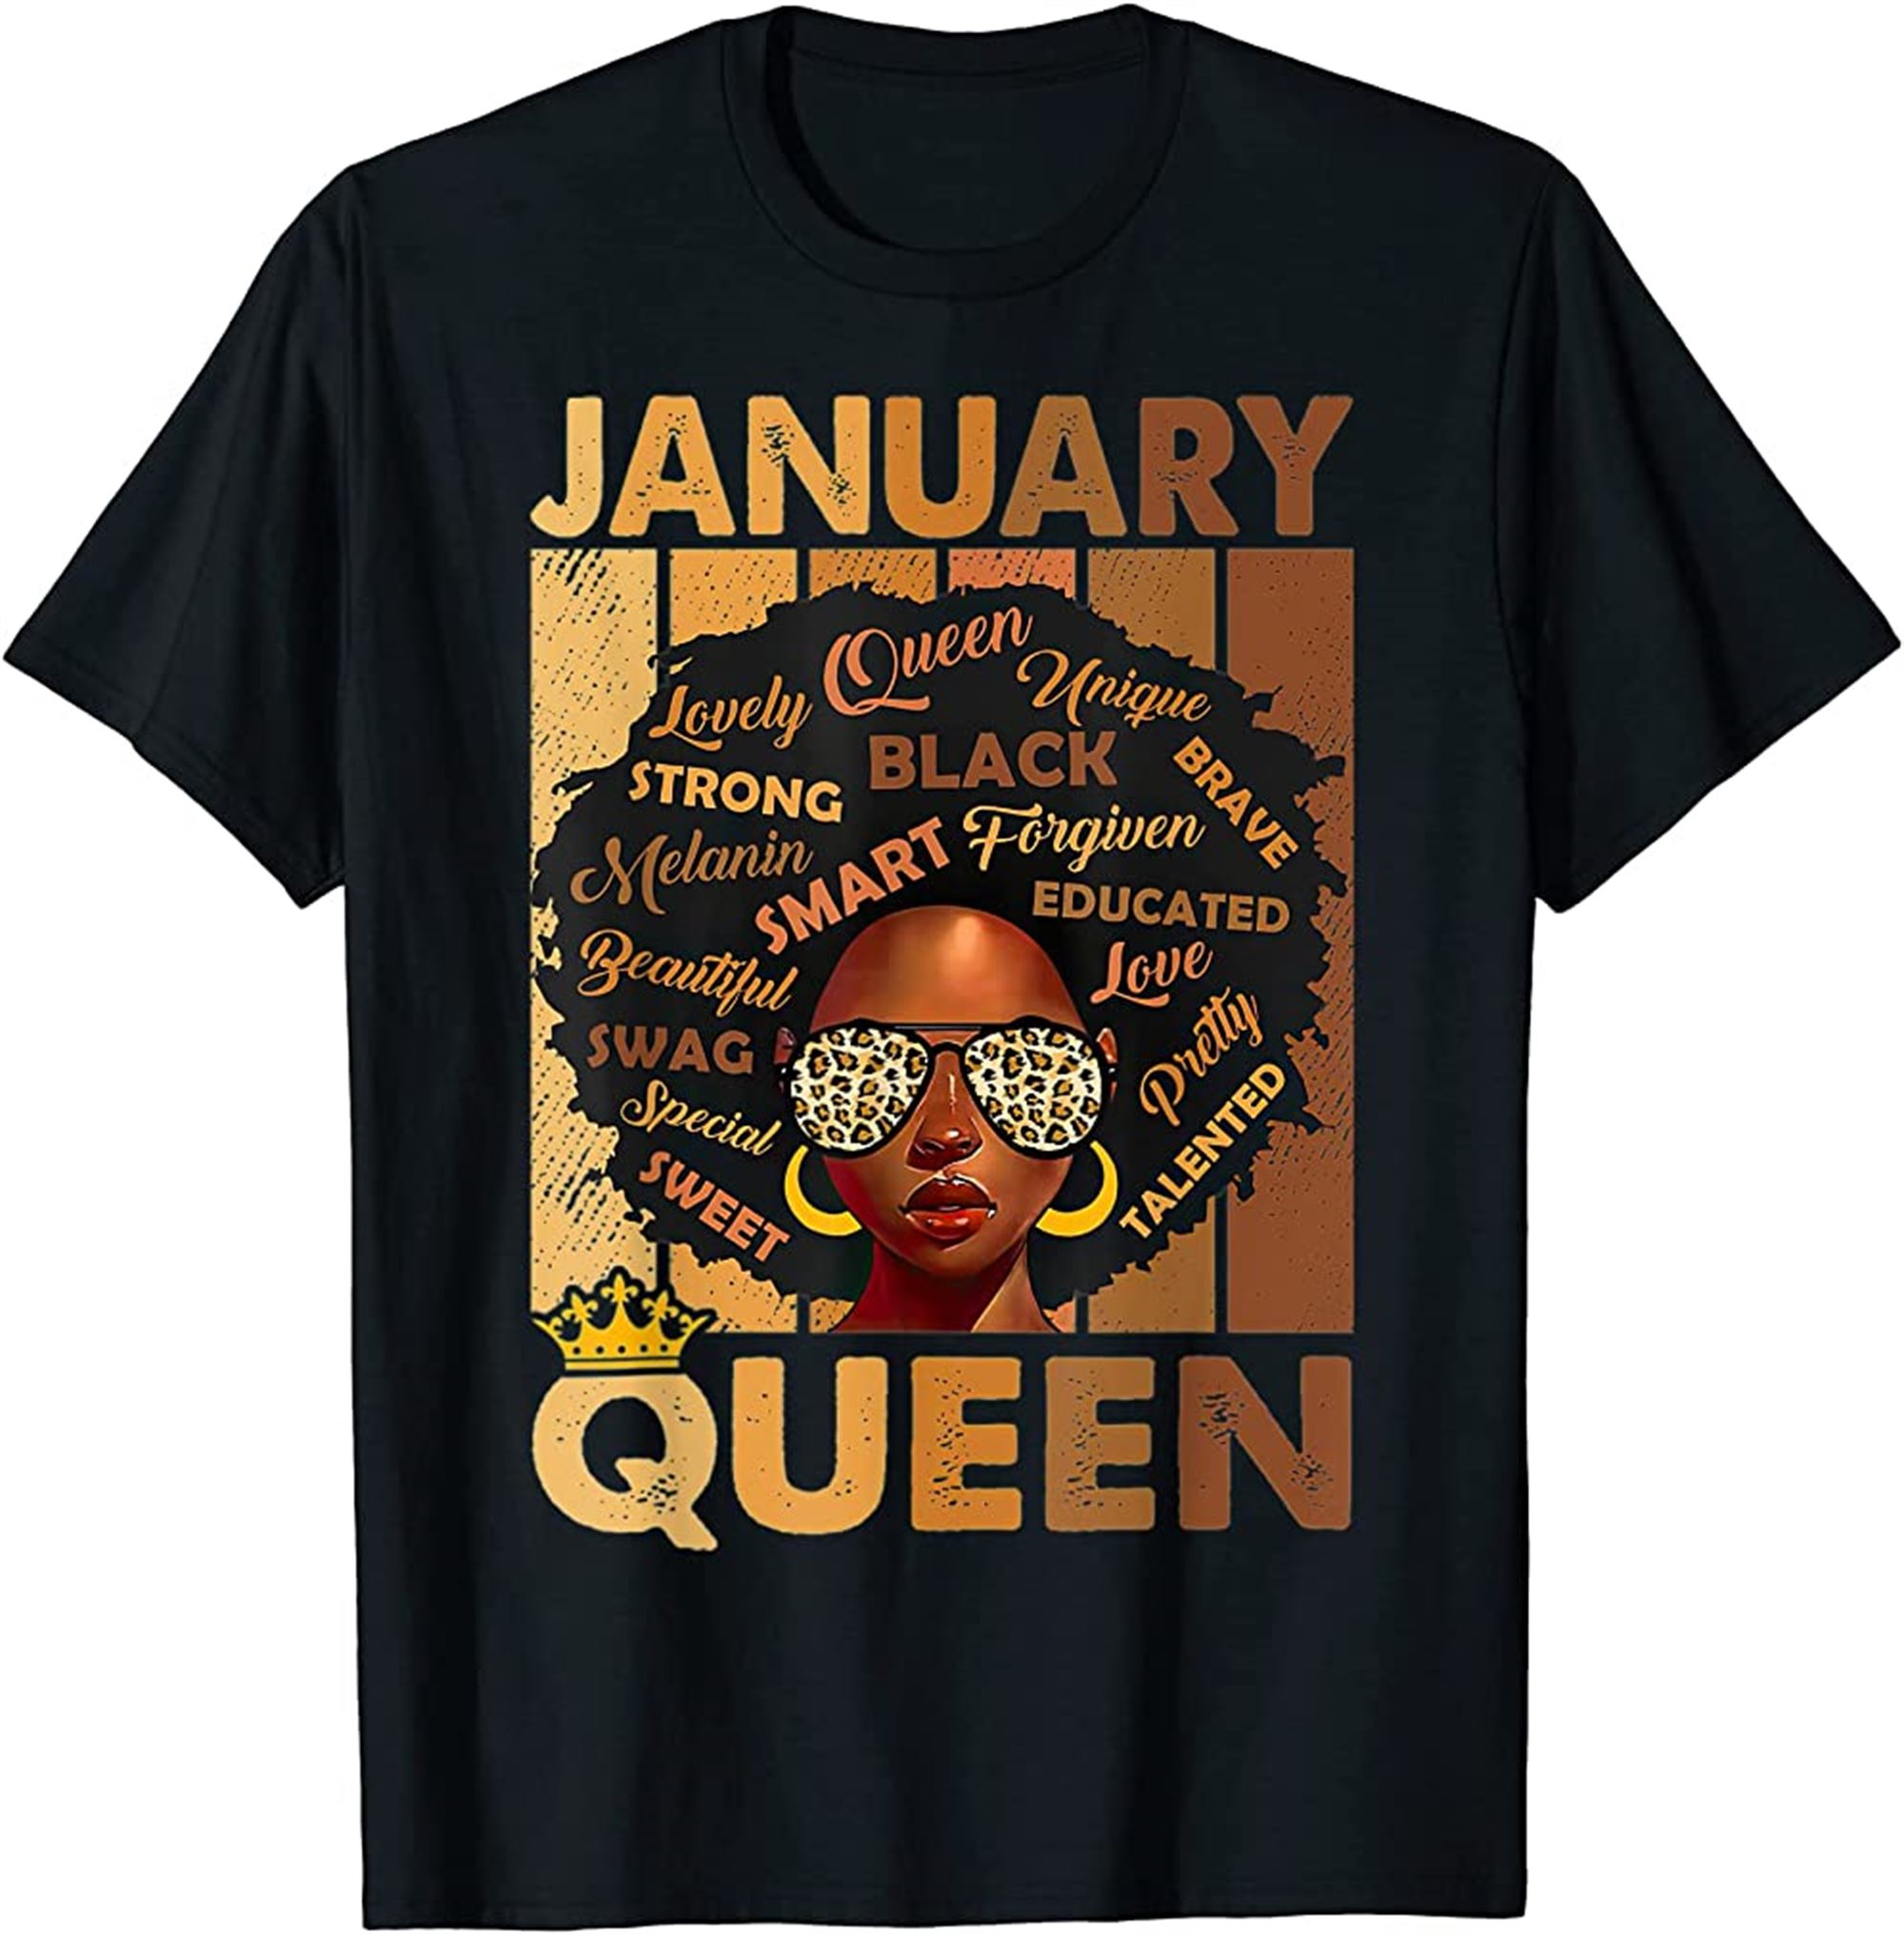 January Queen Birthday African American Black Woman Melanin T-shirt Full Size Up To 5xl